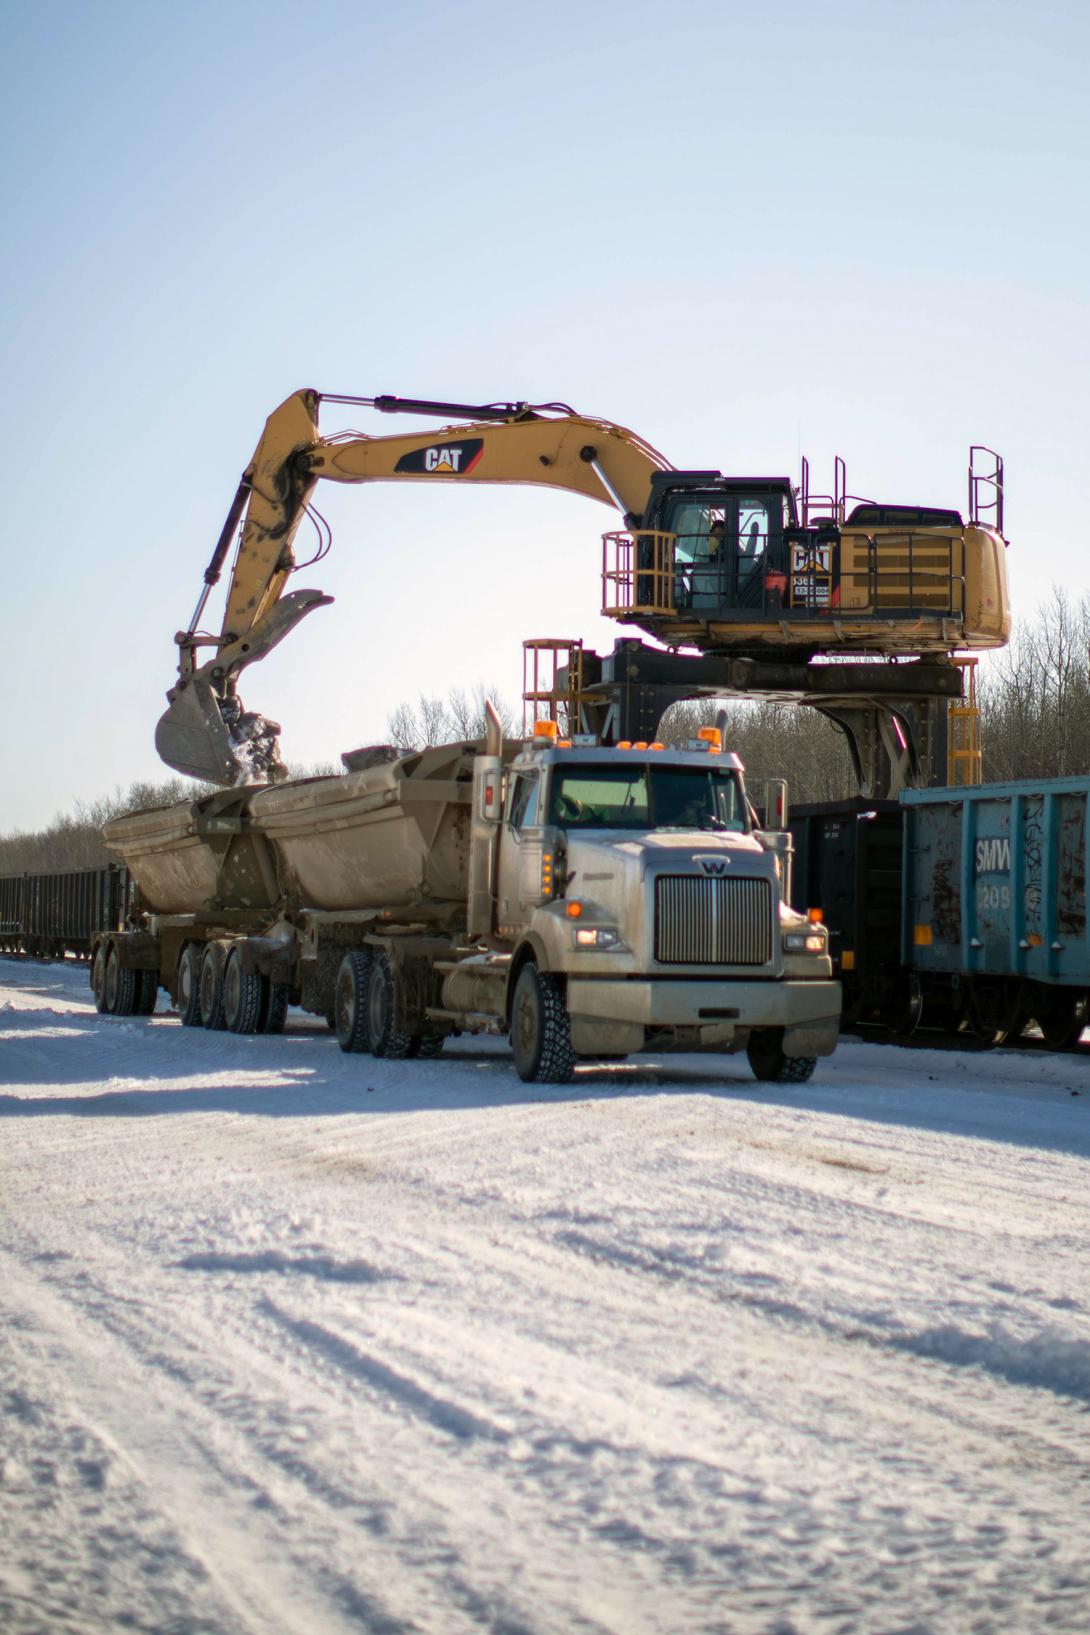 A side-dump truck is loaded with rip-rap to haul and stockpile on site for river diversion. | April 2020